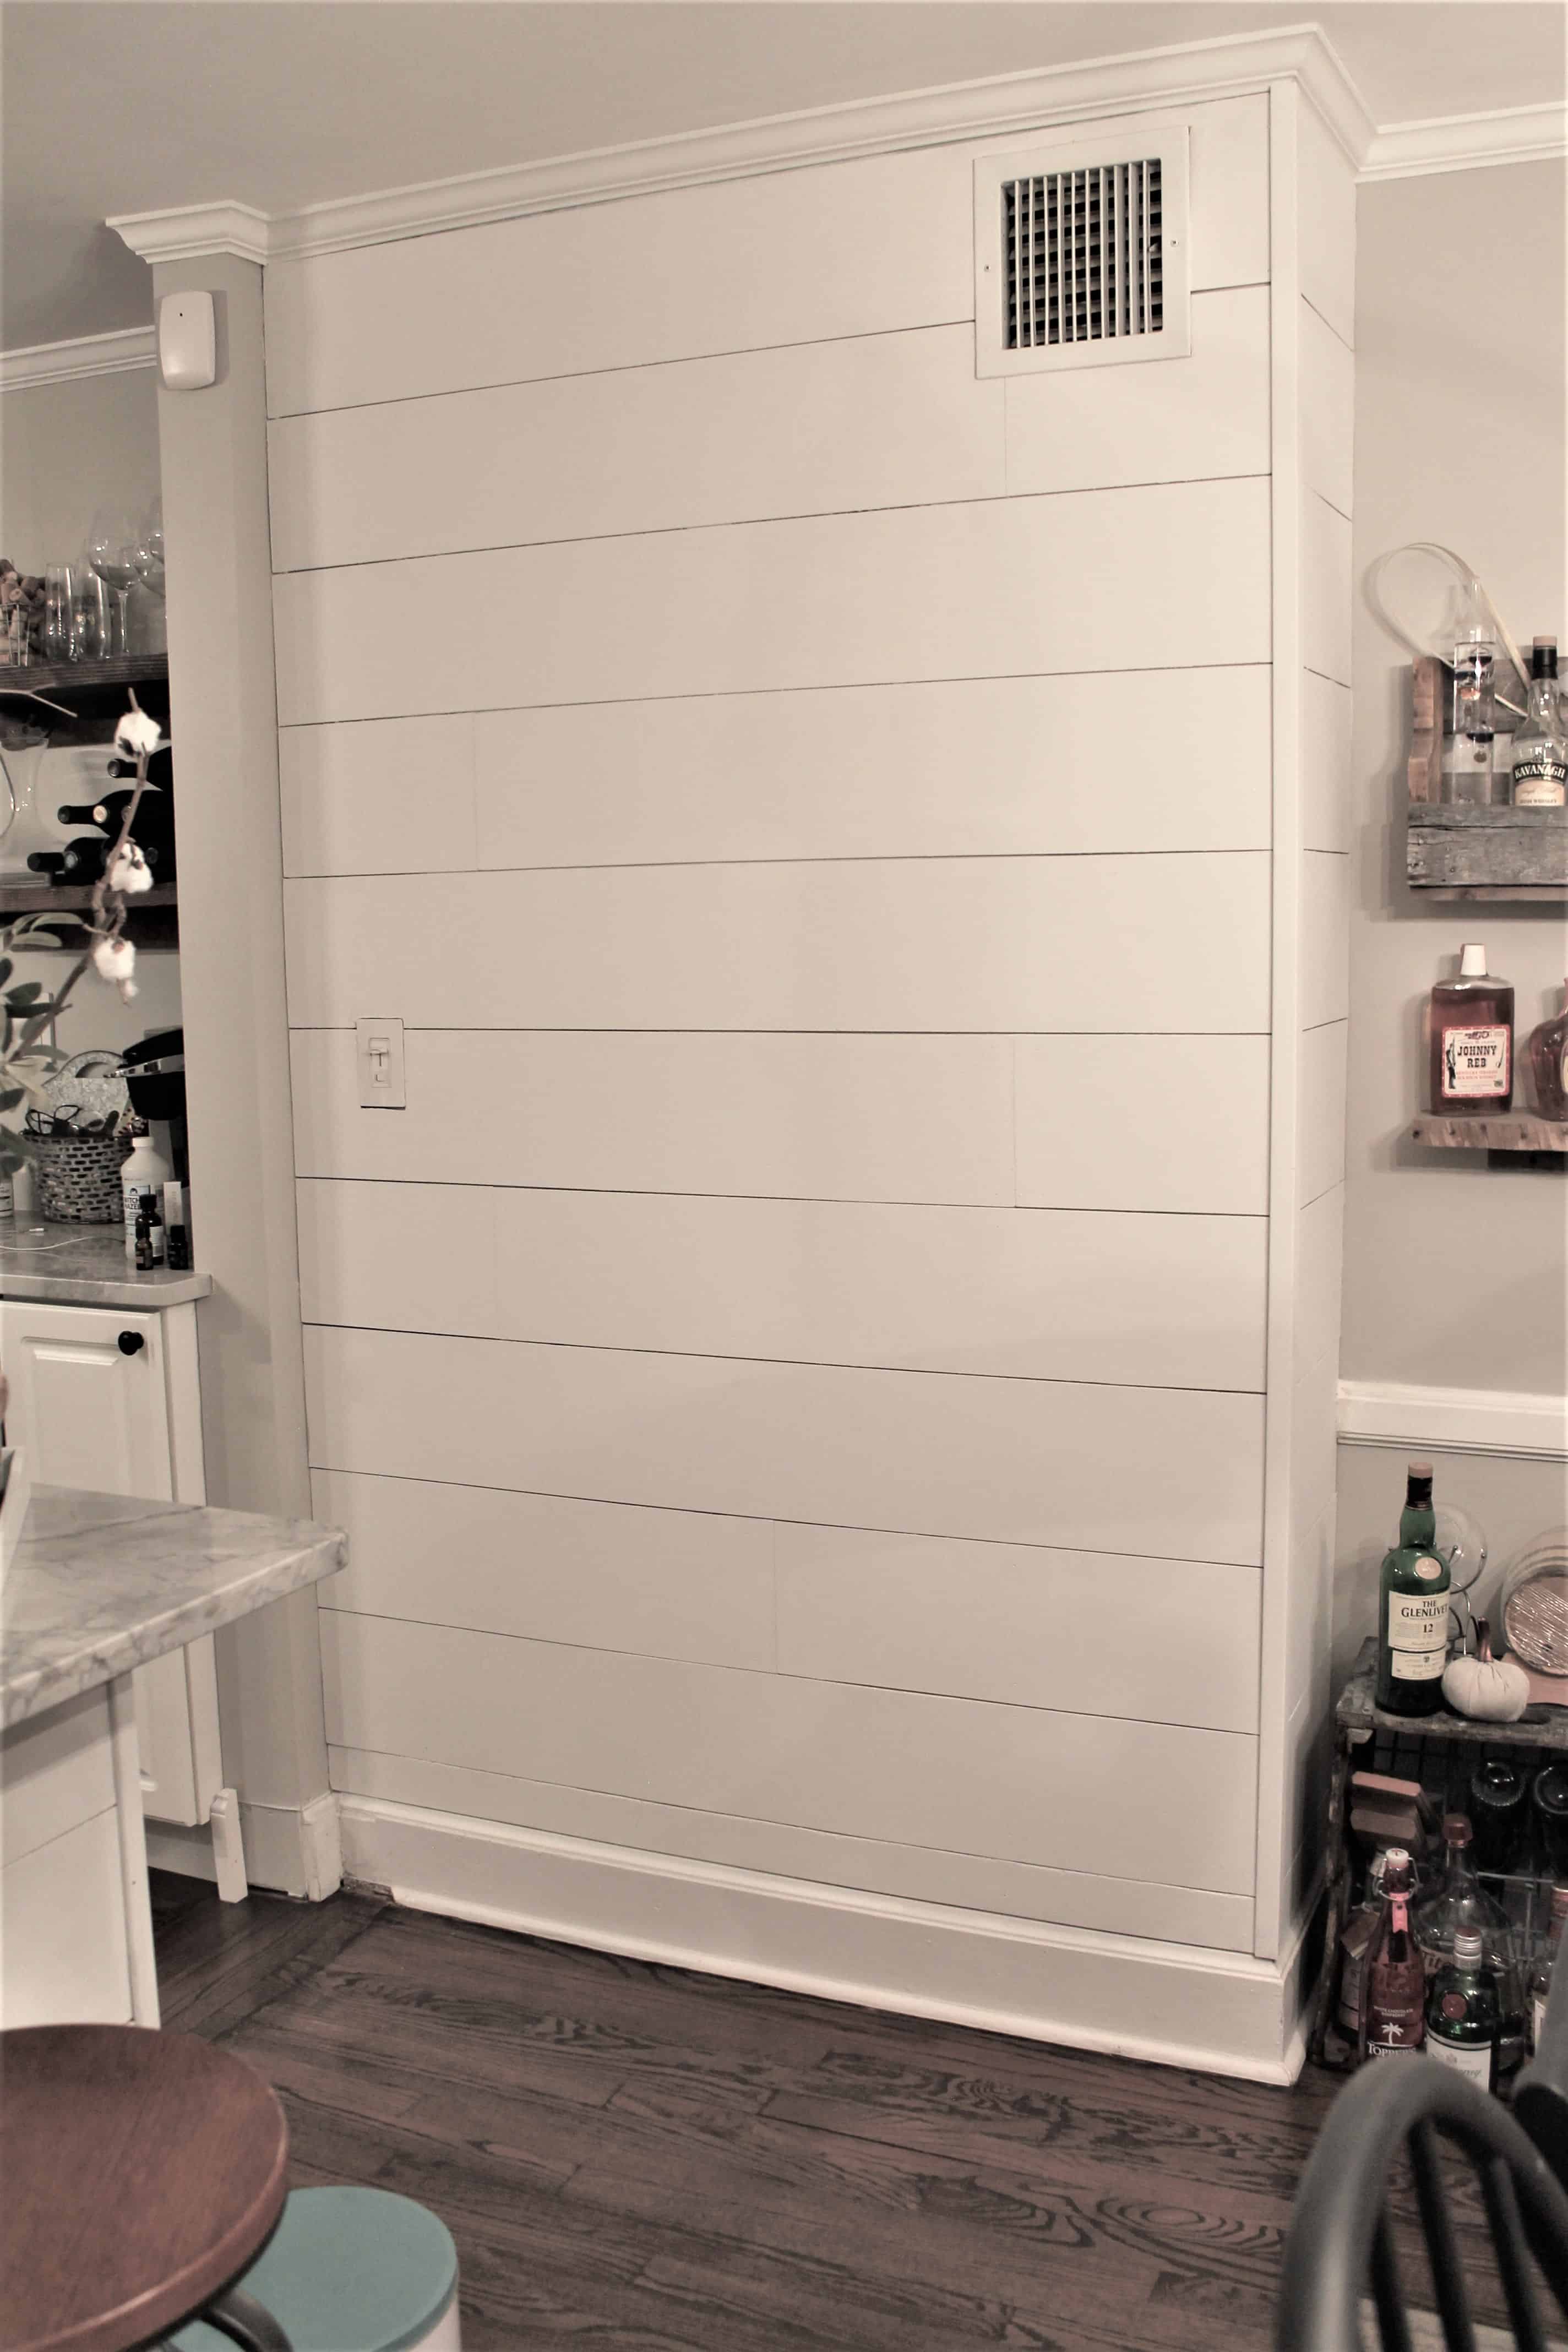 How To Paint Shiplap Paint Colors To Use West Magnolia Charm